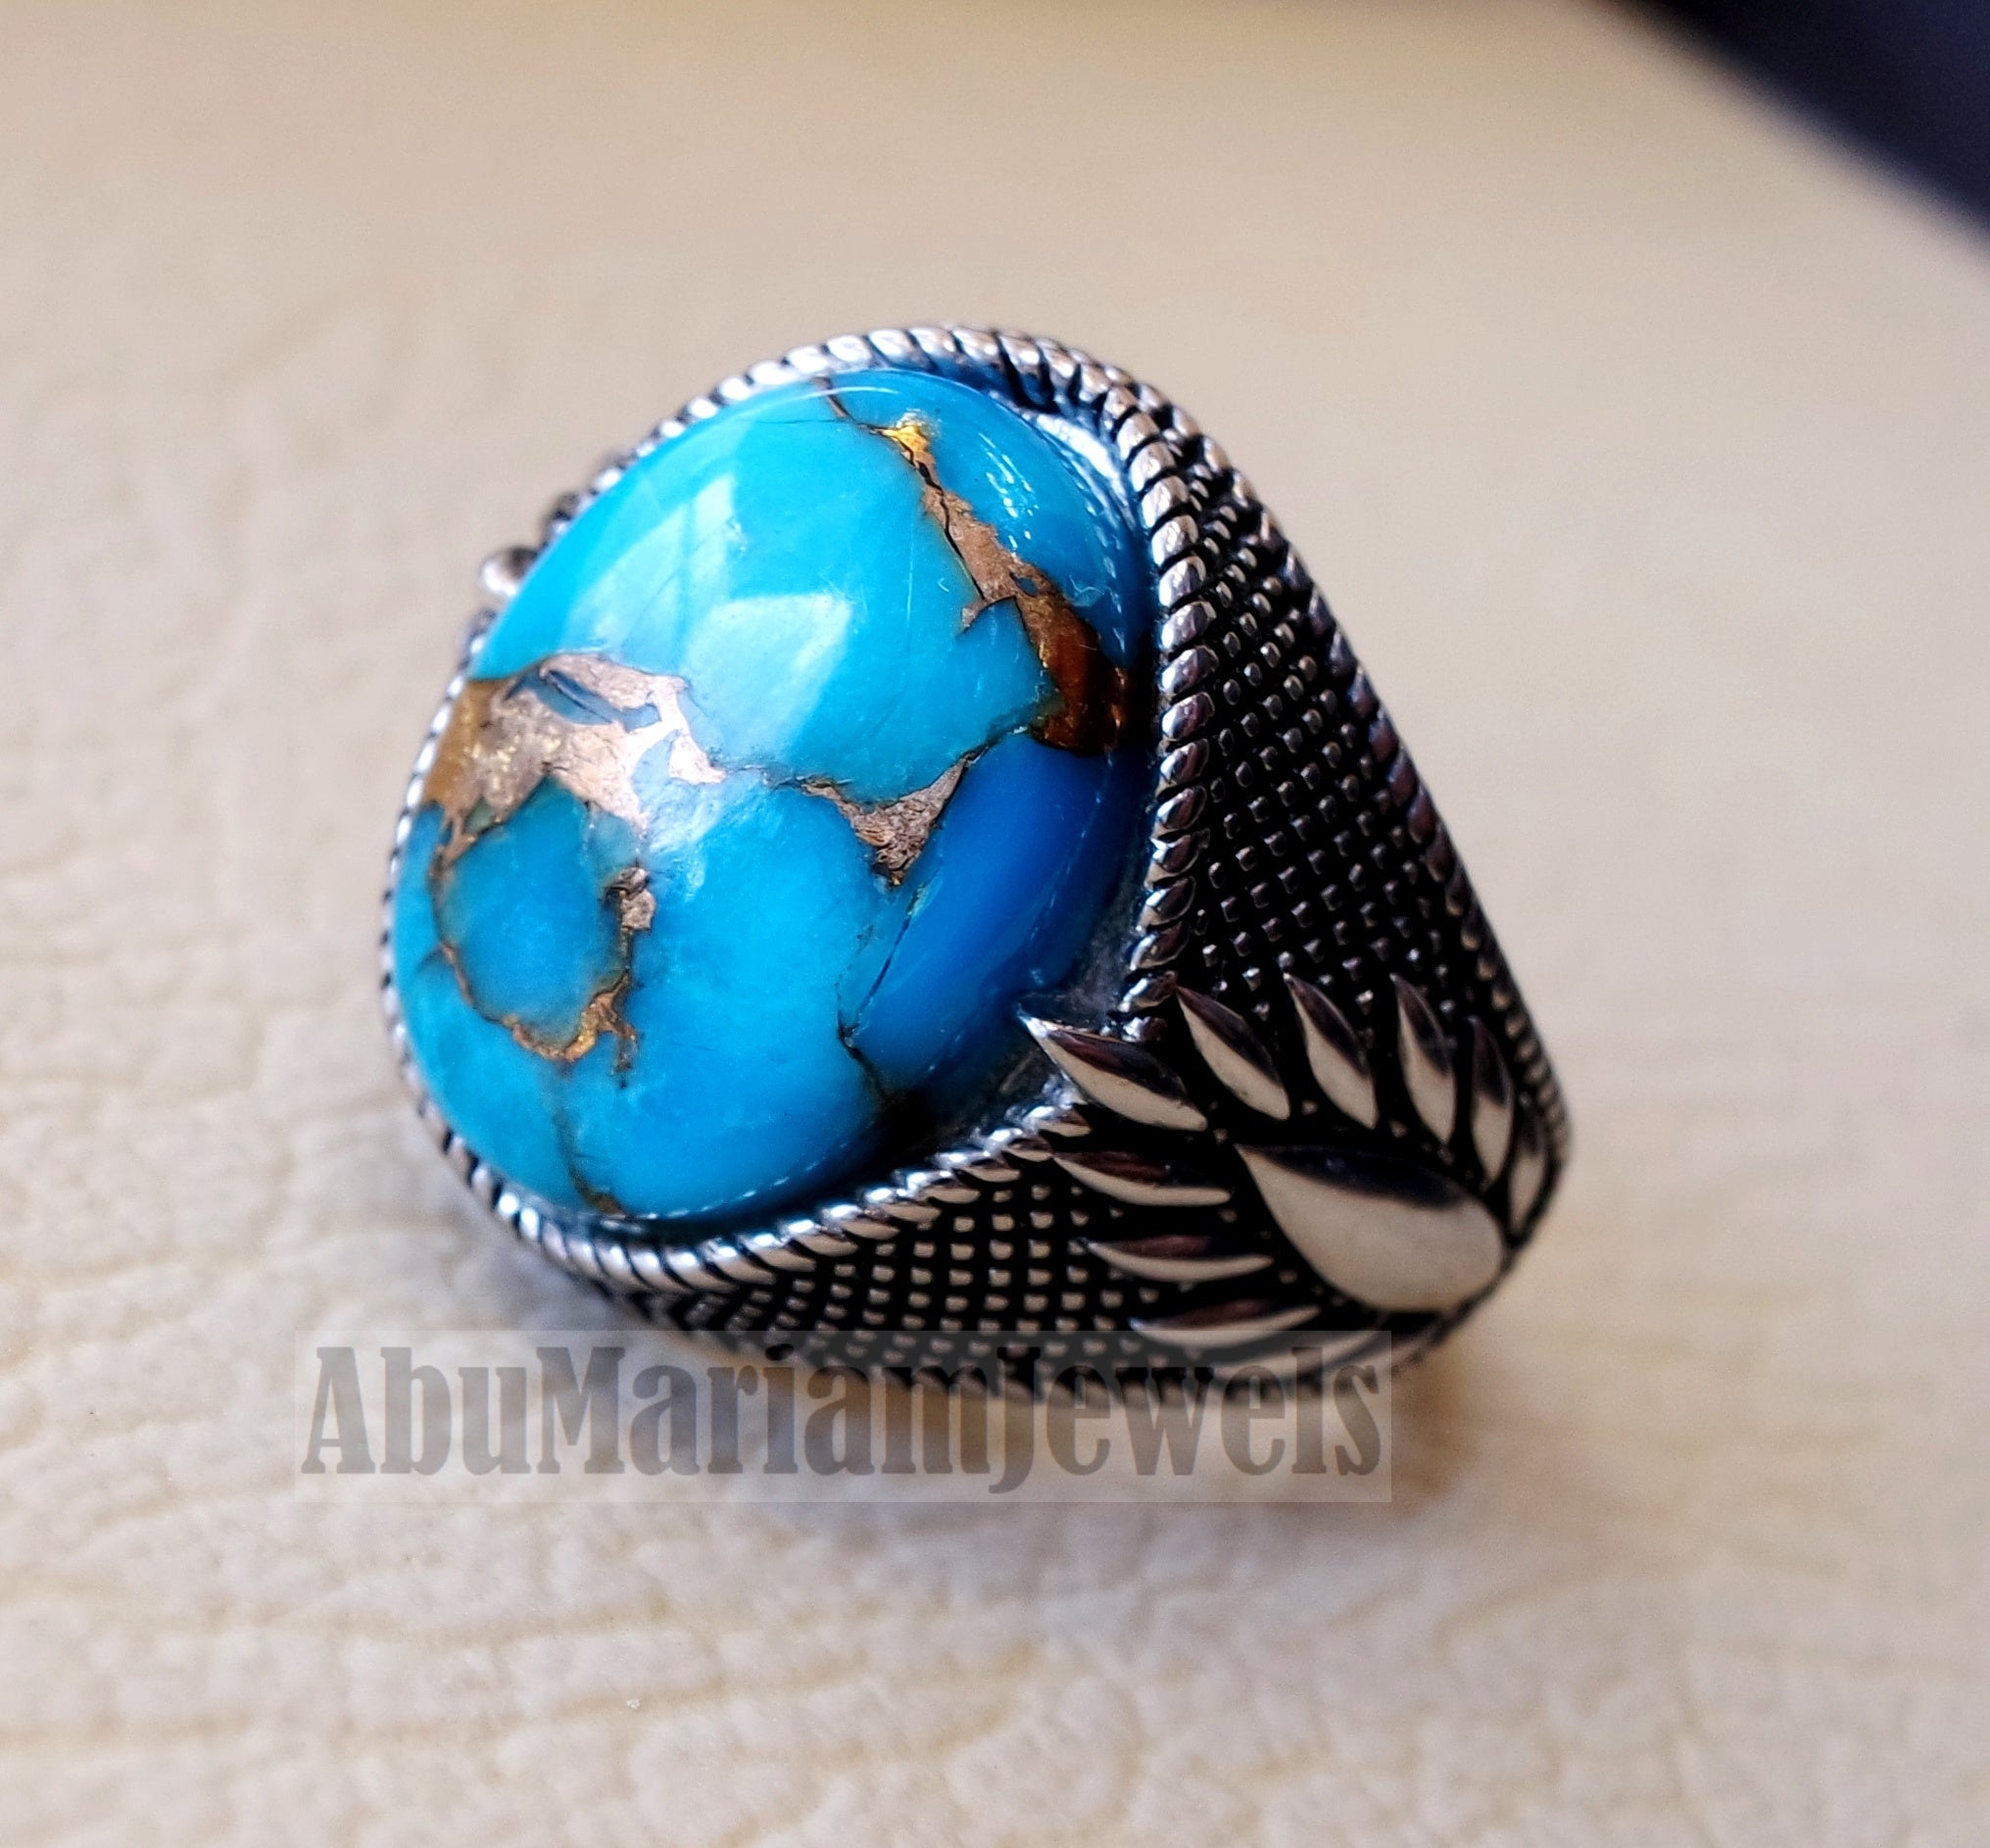 man ring copper turquoise natural stone sterling silver 925 oval cabochon semi precious gem ottoman arabic style all sizes jewelry فيروز